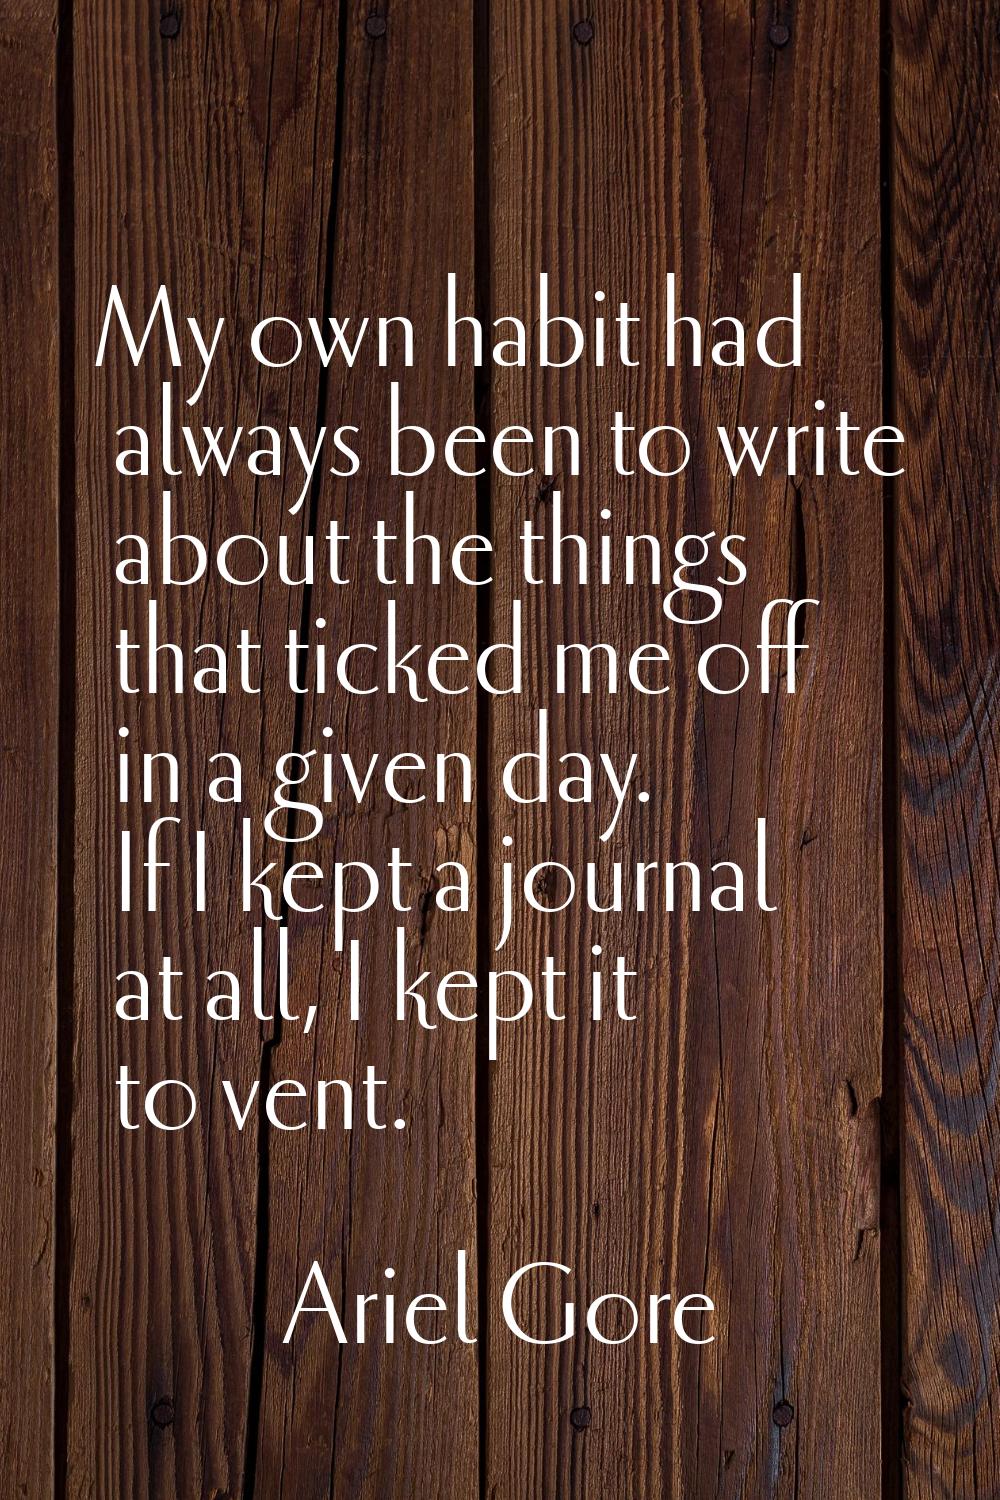 My own habit had always been to write about the things that ticked me off in a given day. If I kept